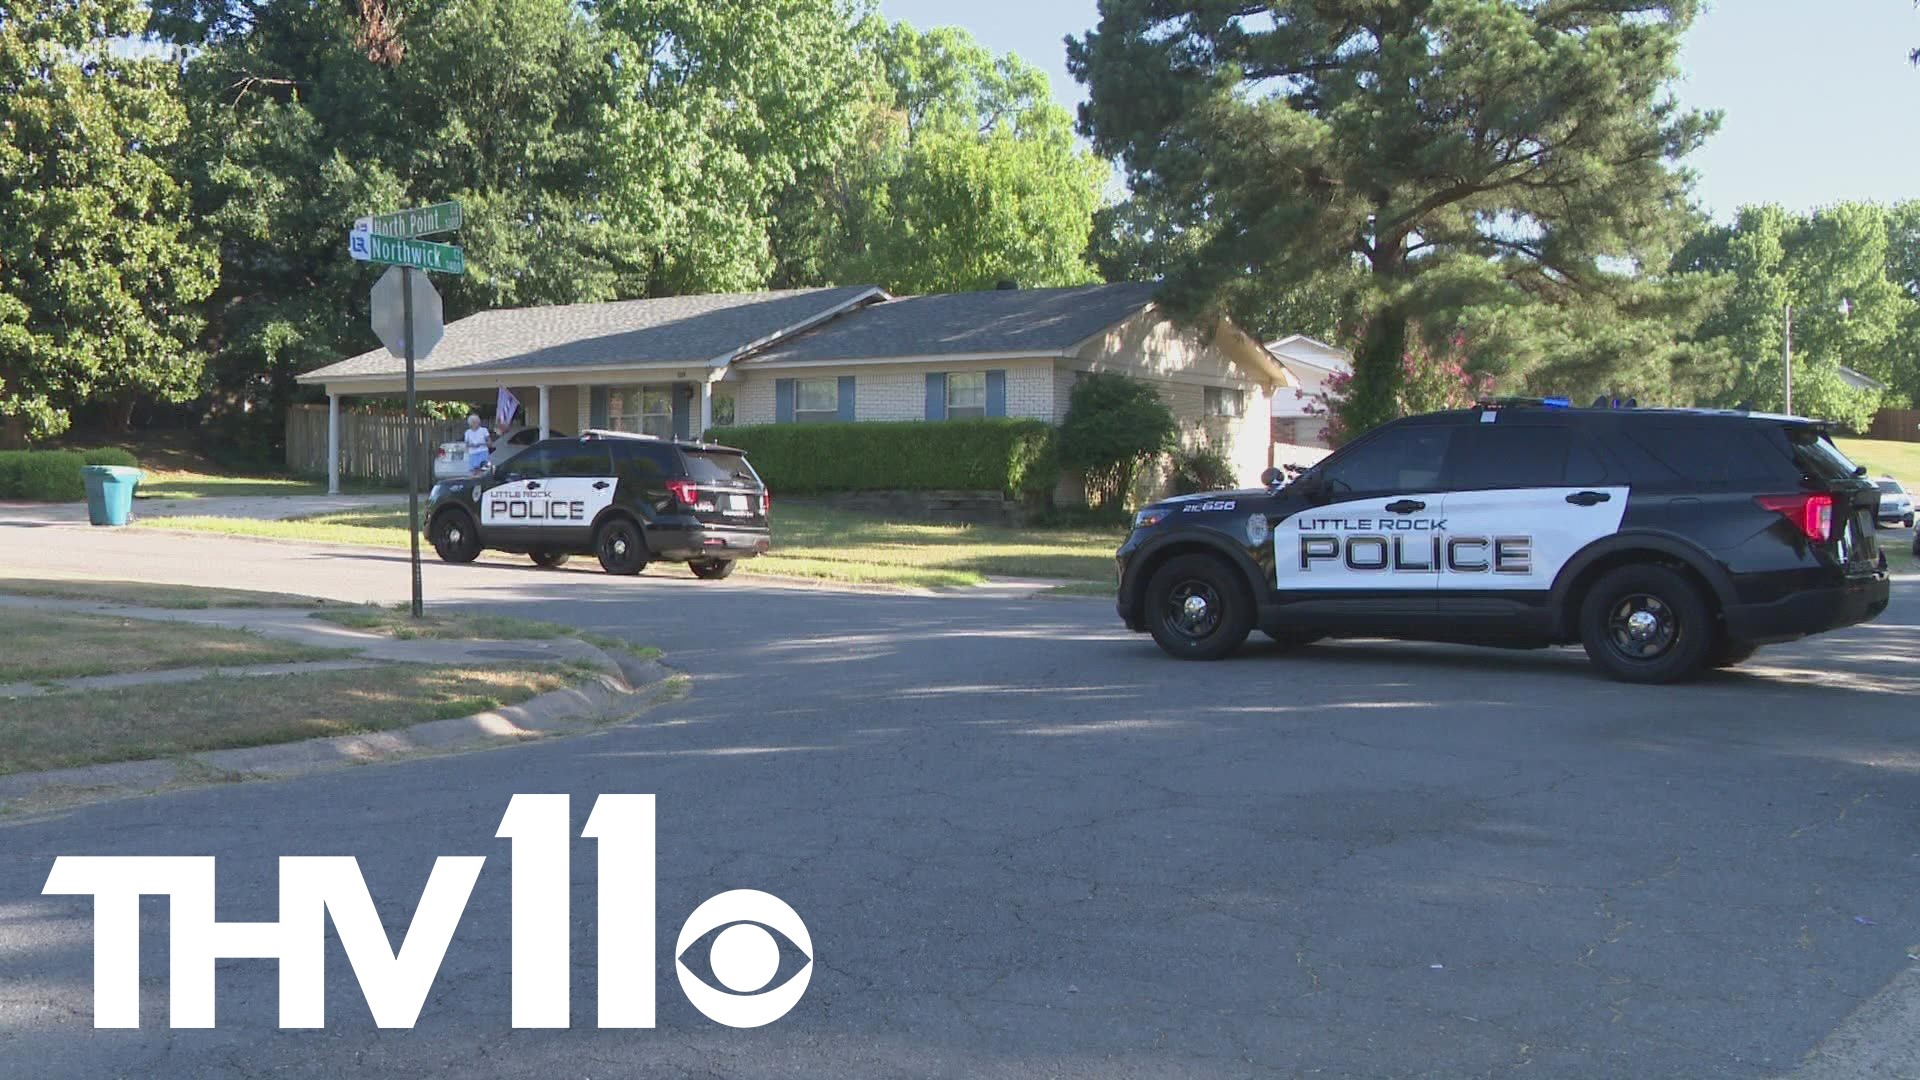 Little Rock police are now investigating after a shooting on Northwick Court Monday afternoon has left one man dead.